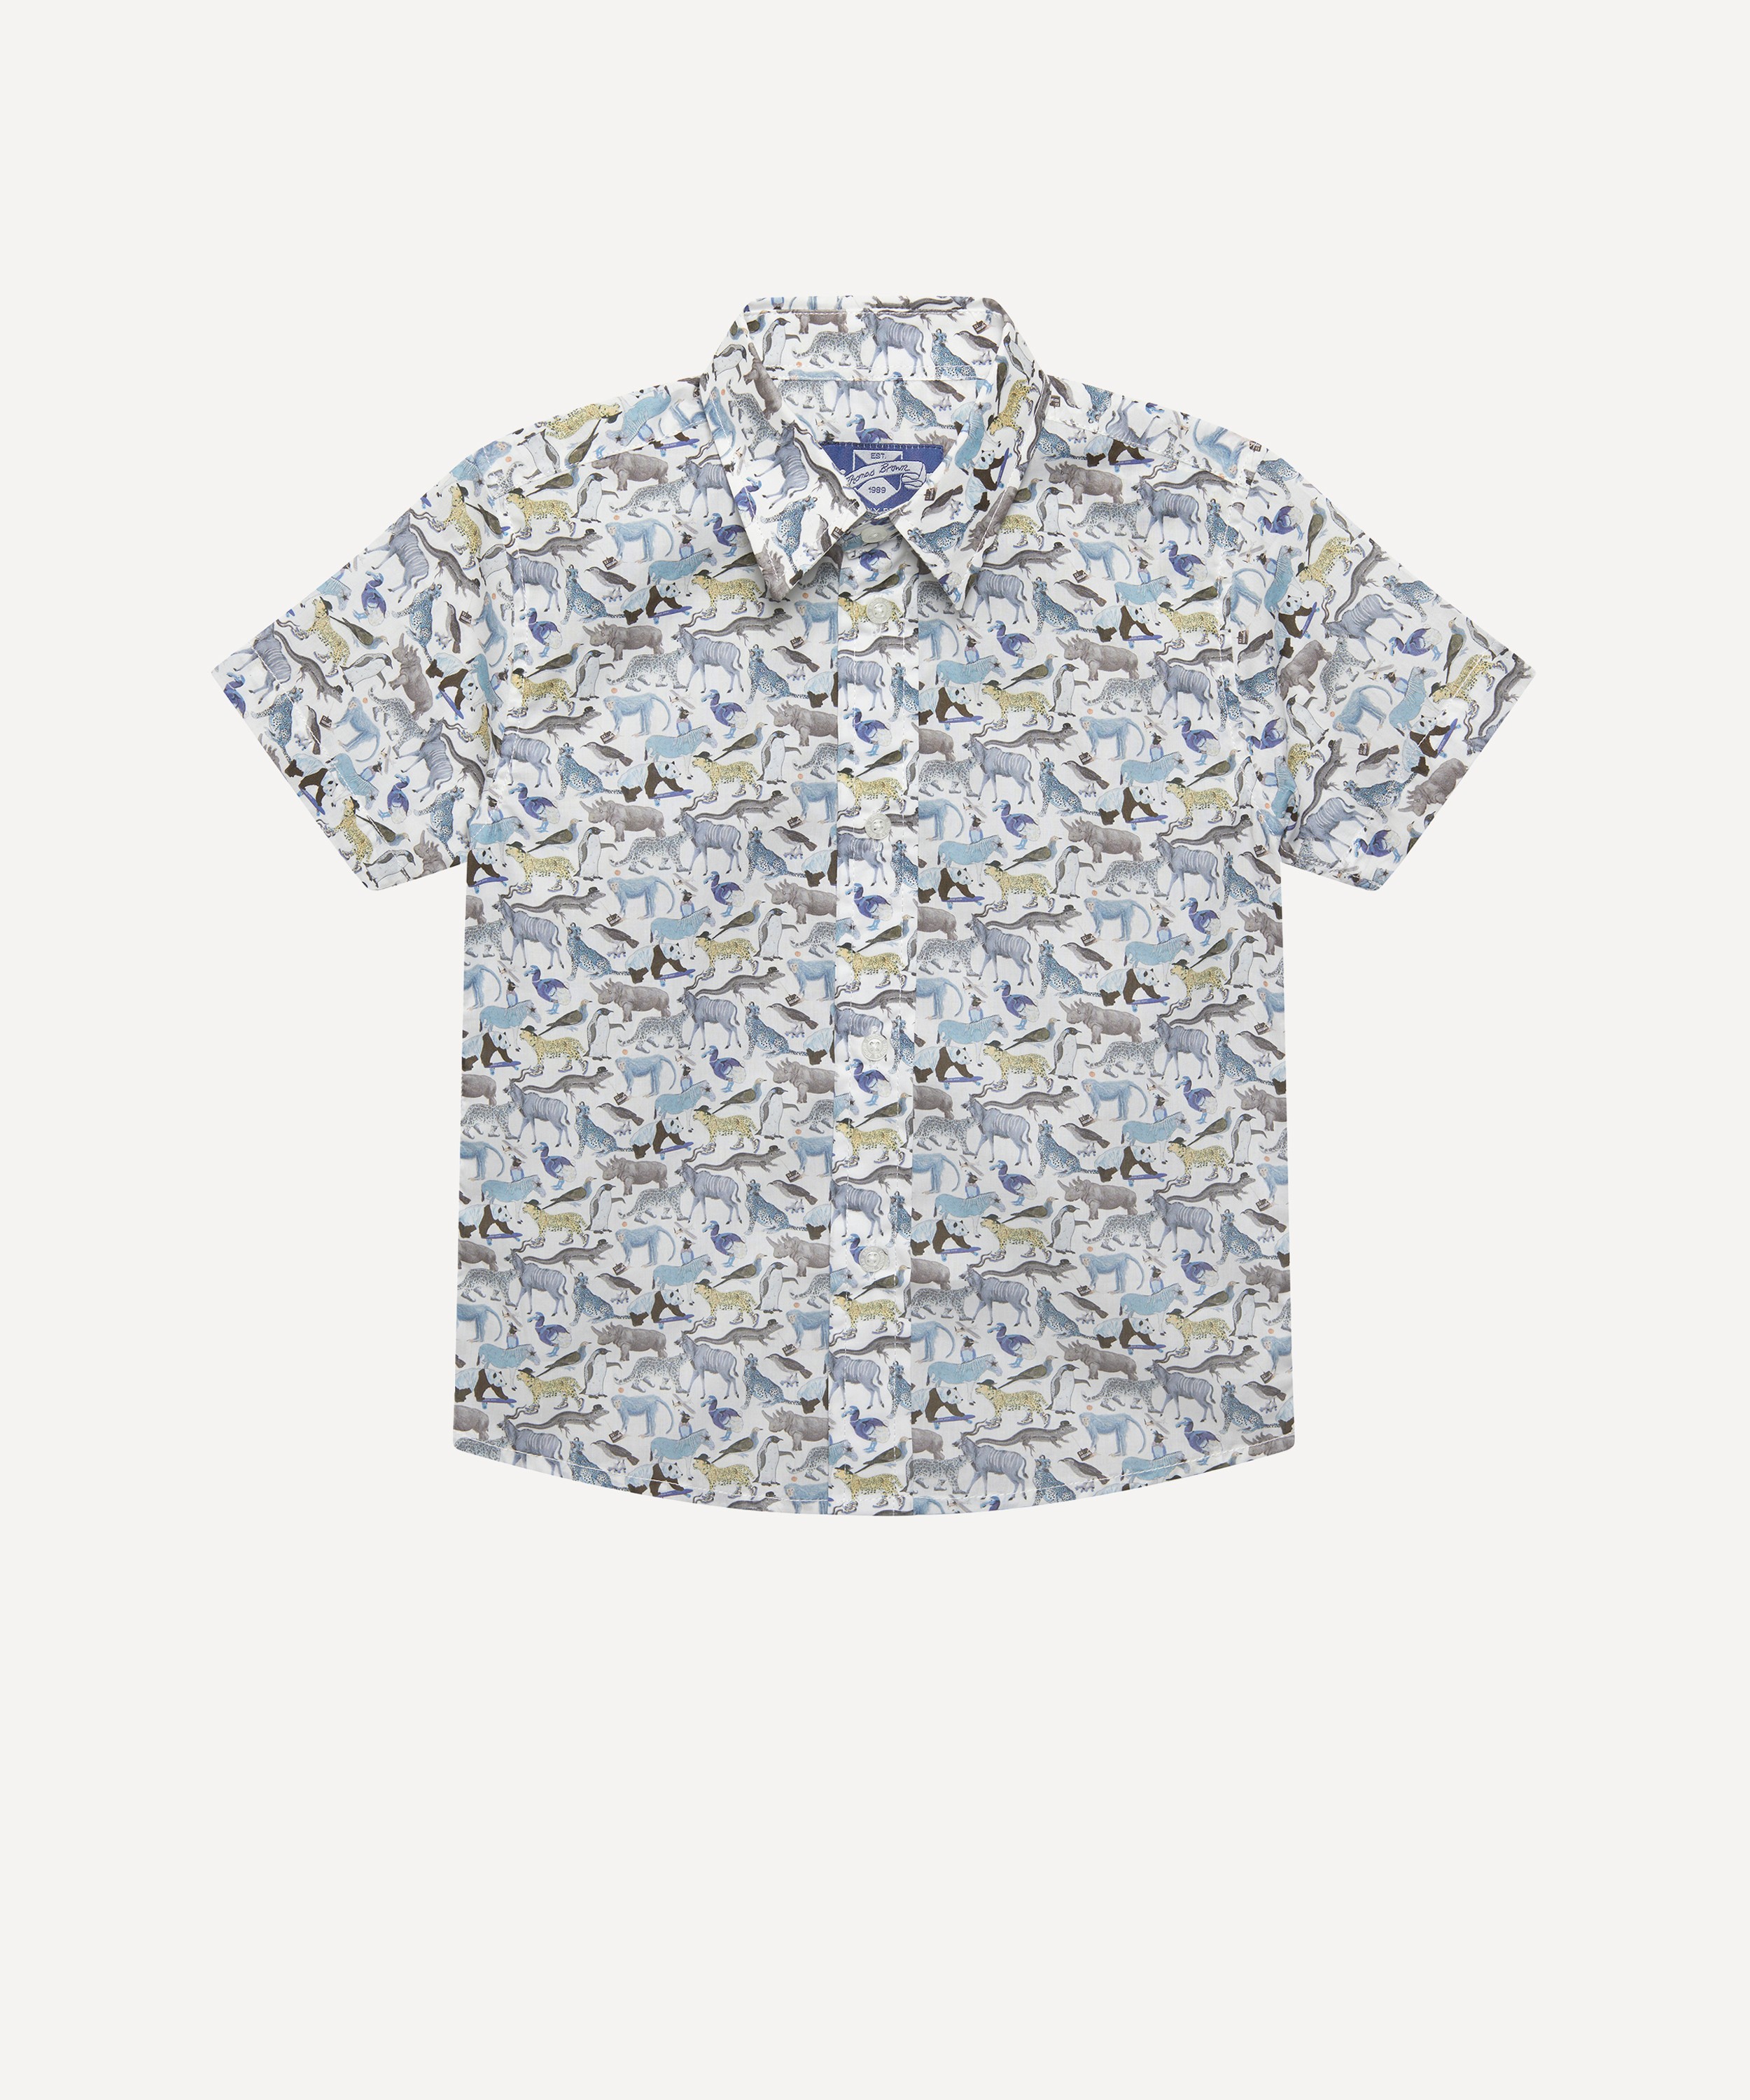 Trotters - Short Sleeve Zoo Shirt 6-11 Years image number 0